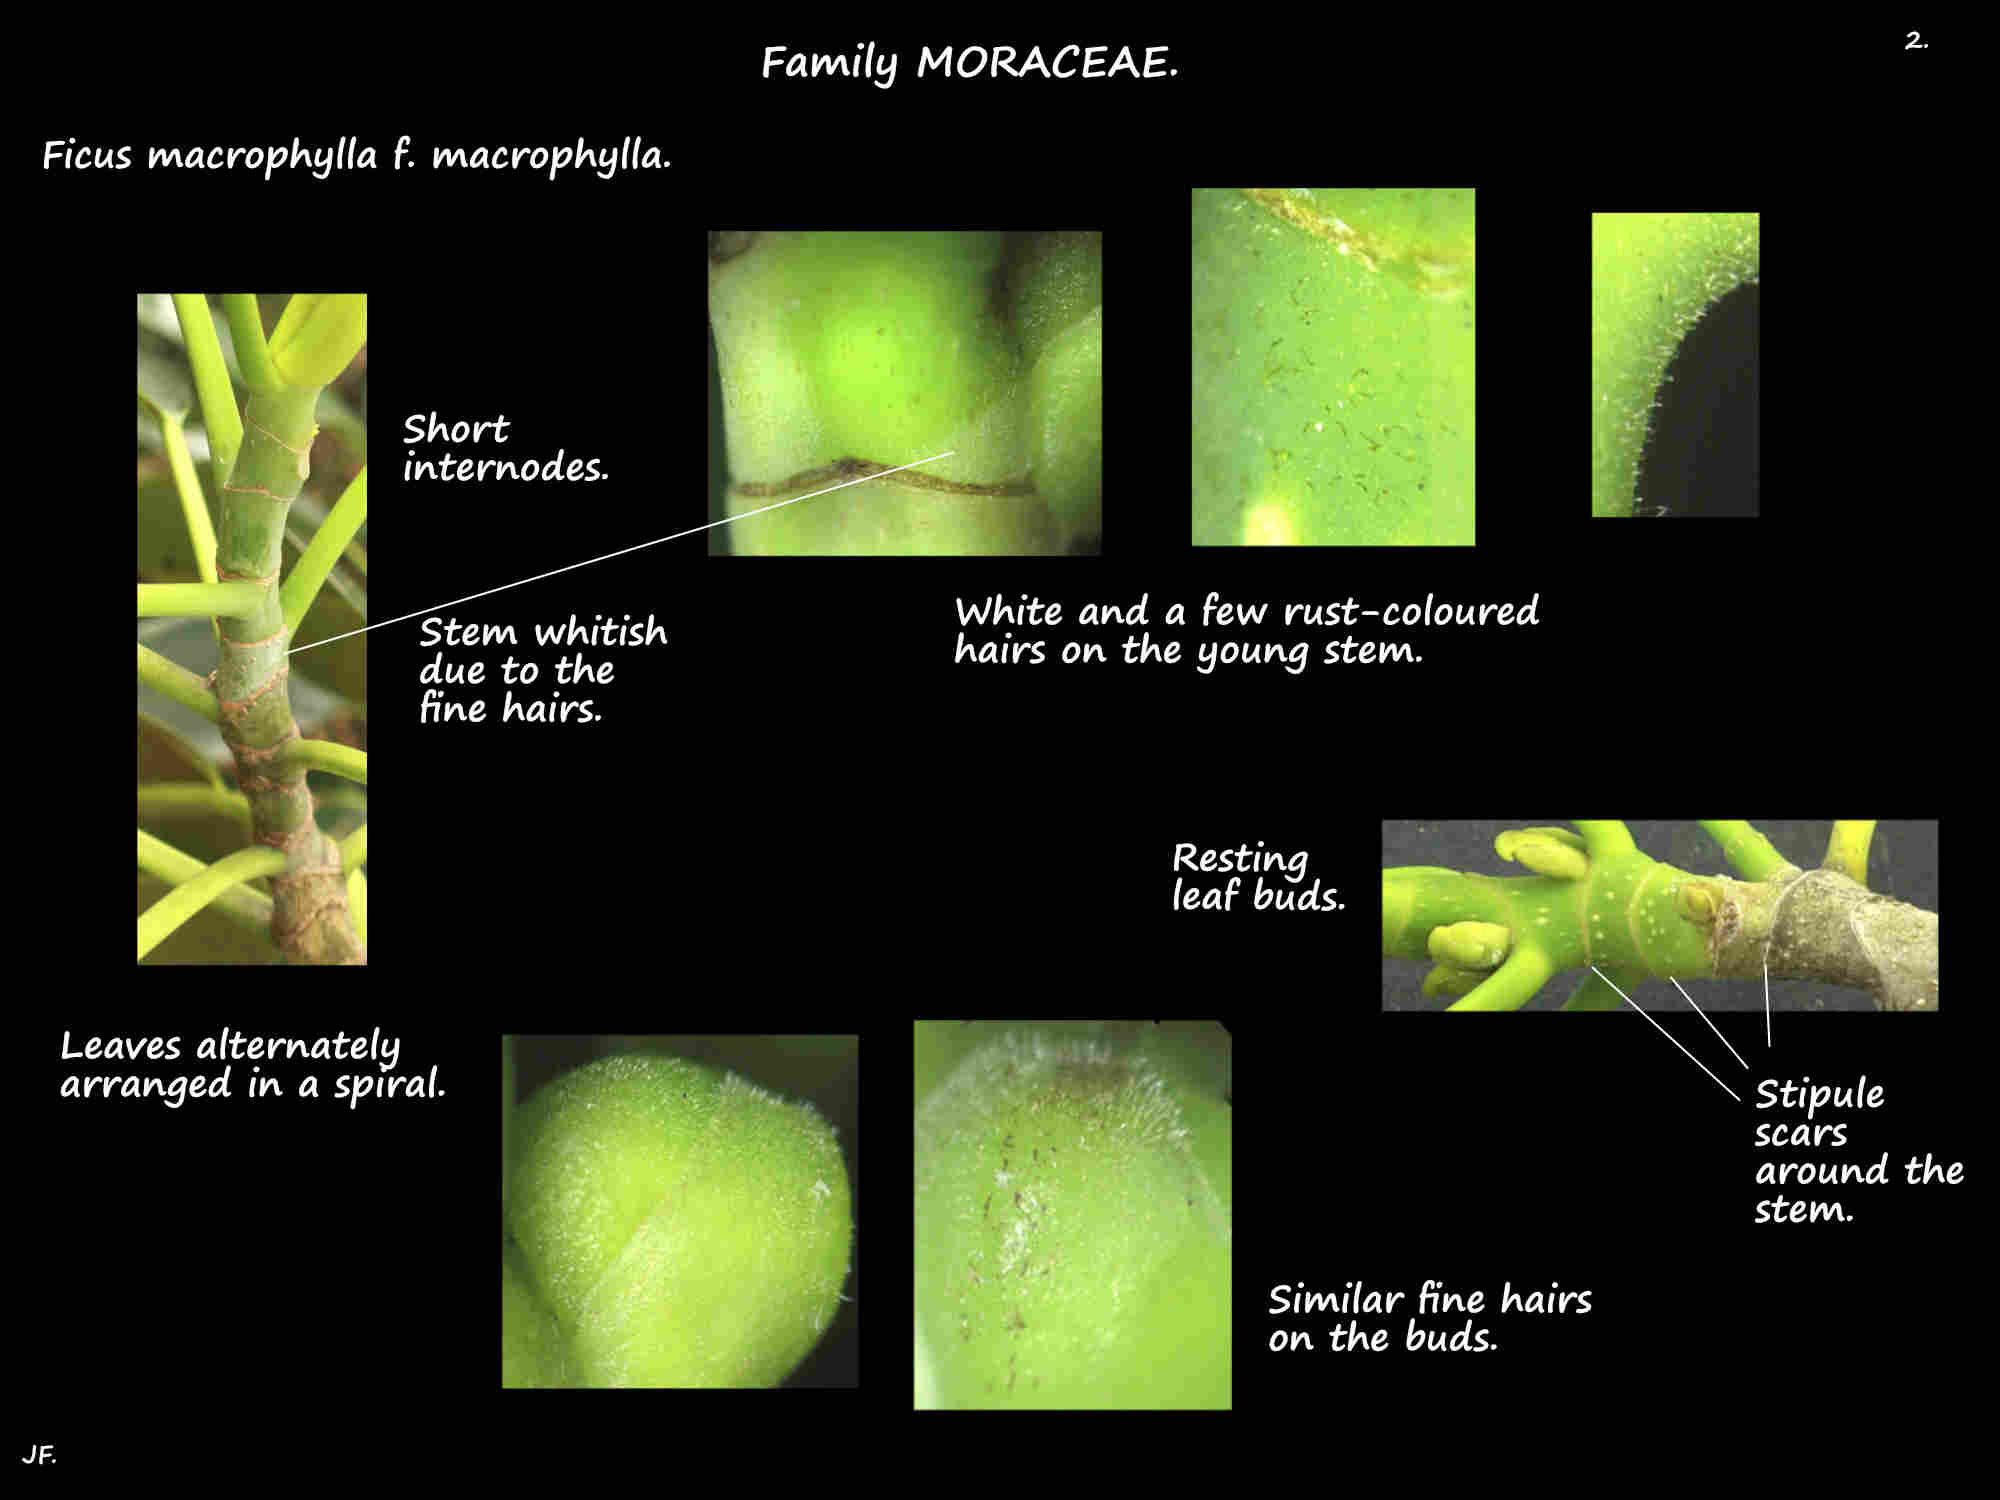 2 Hairs on young Ficus macrophylla stems & buds